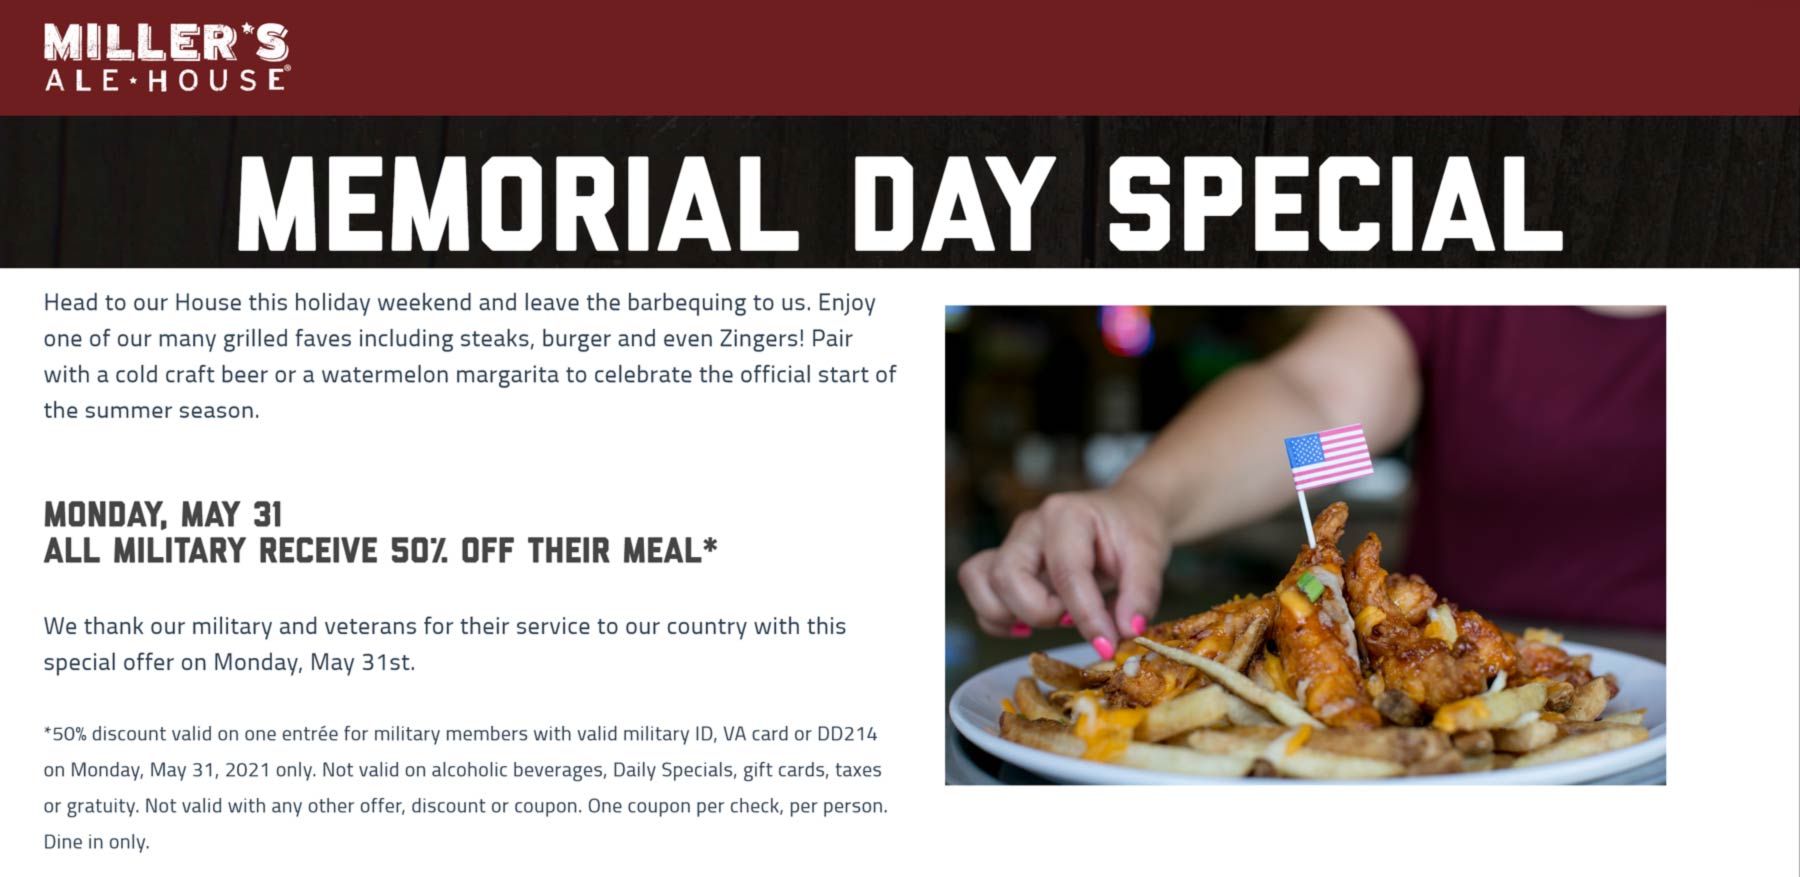 Millers Ale House restaurants Coupon  Military enjoy 50% off an entree Monday at Millers Ale House #millersalehouse 